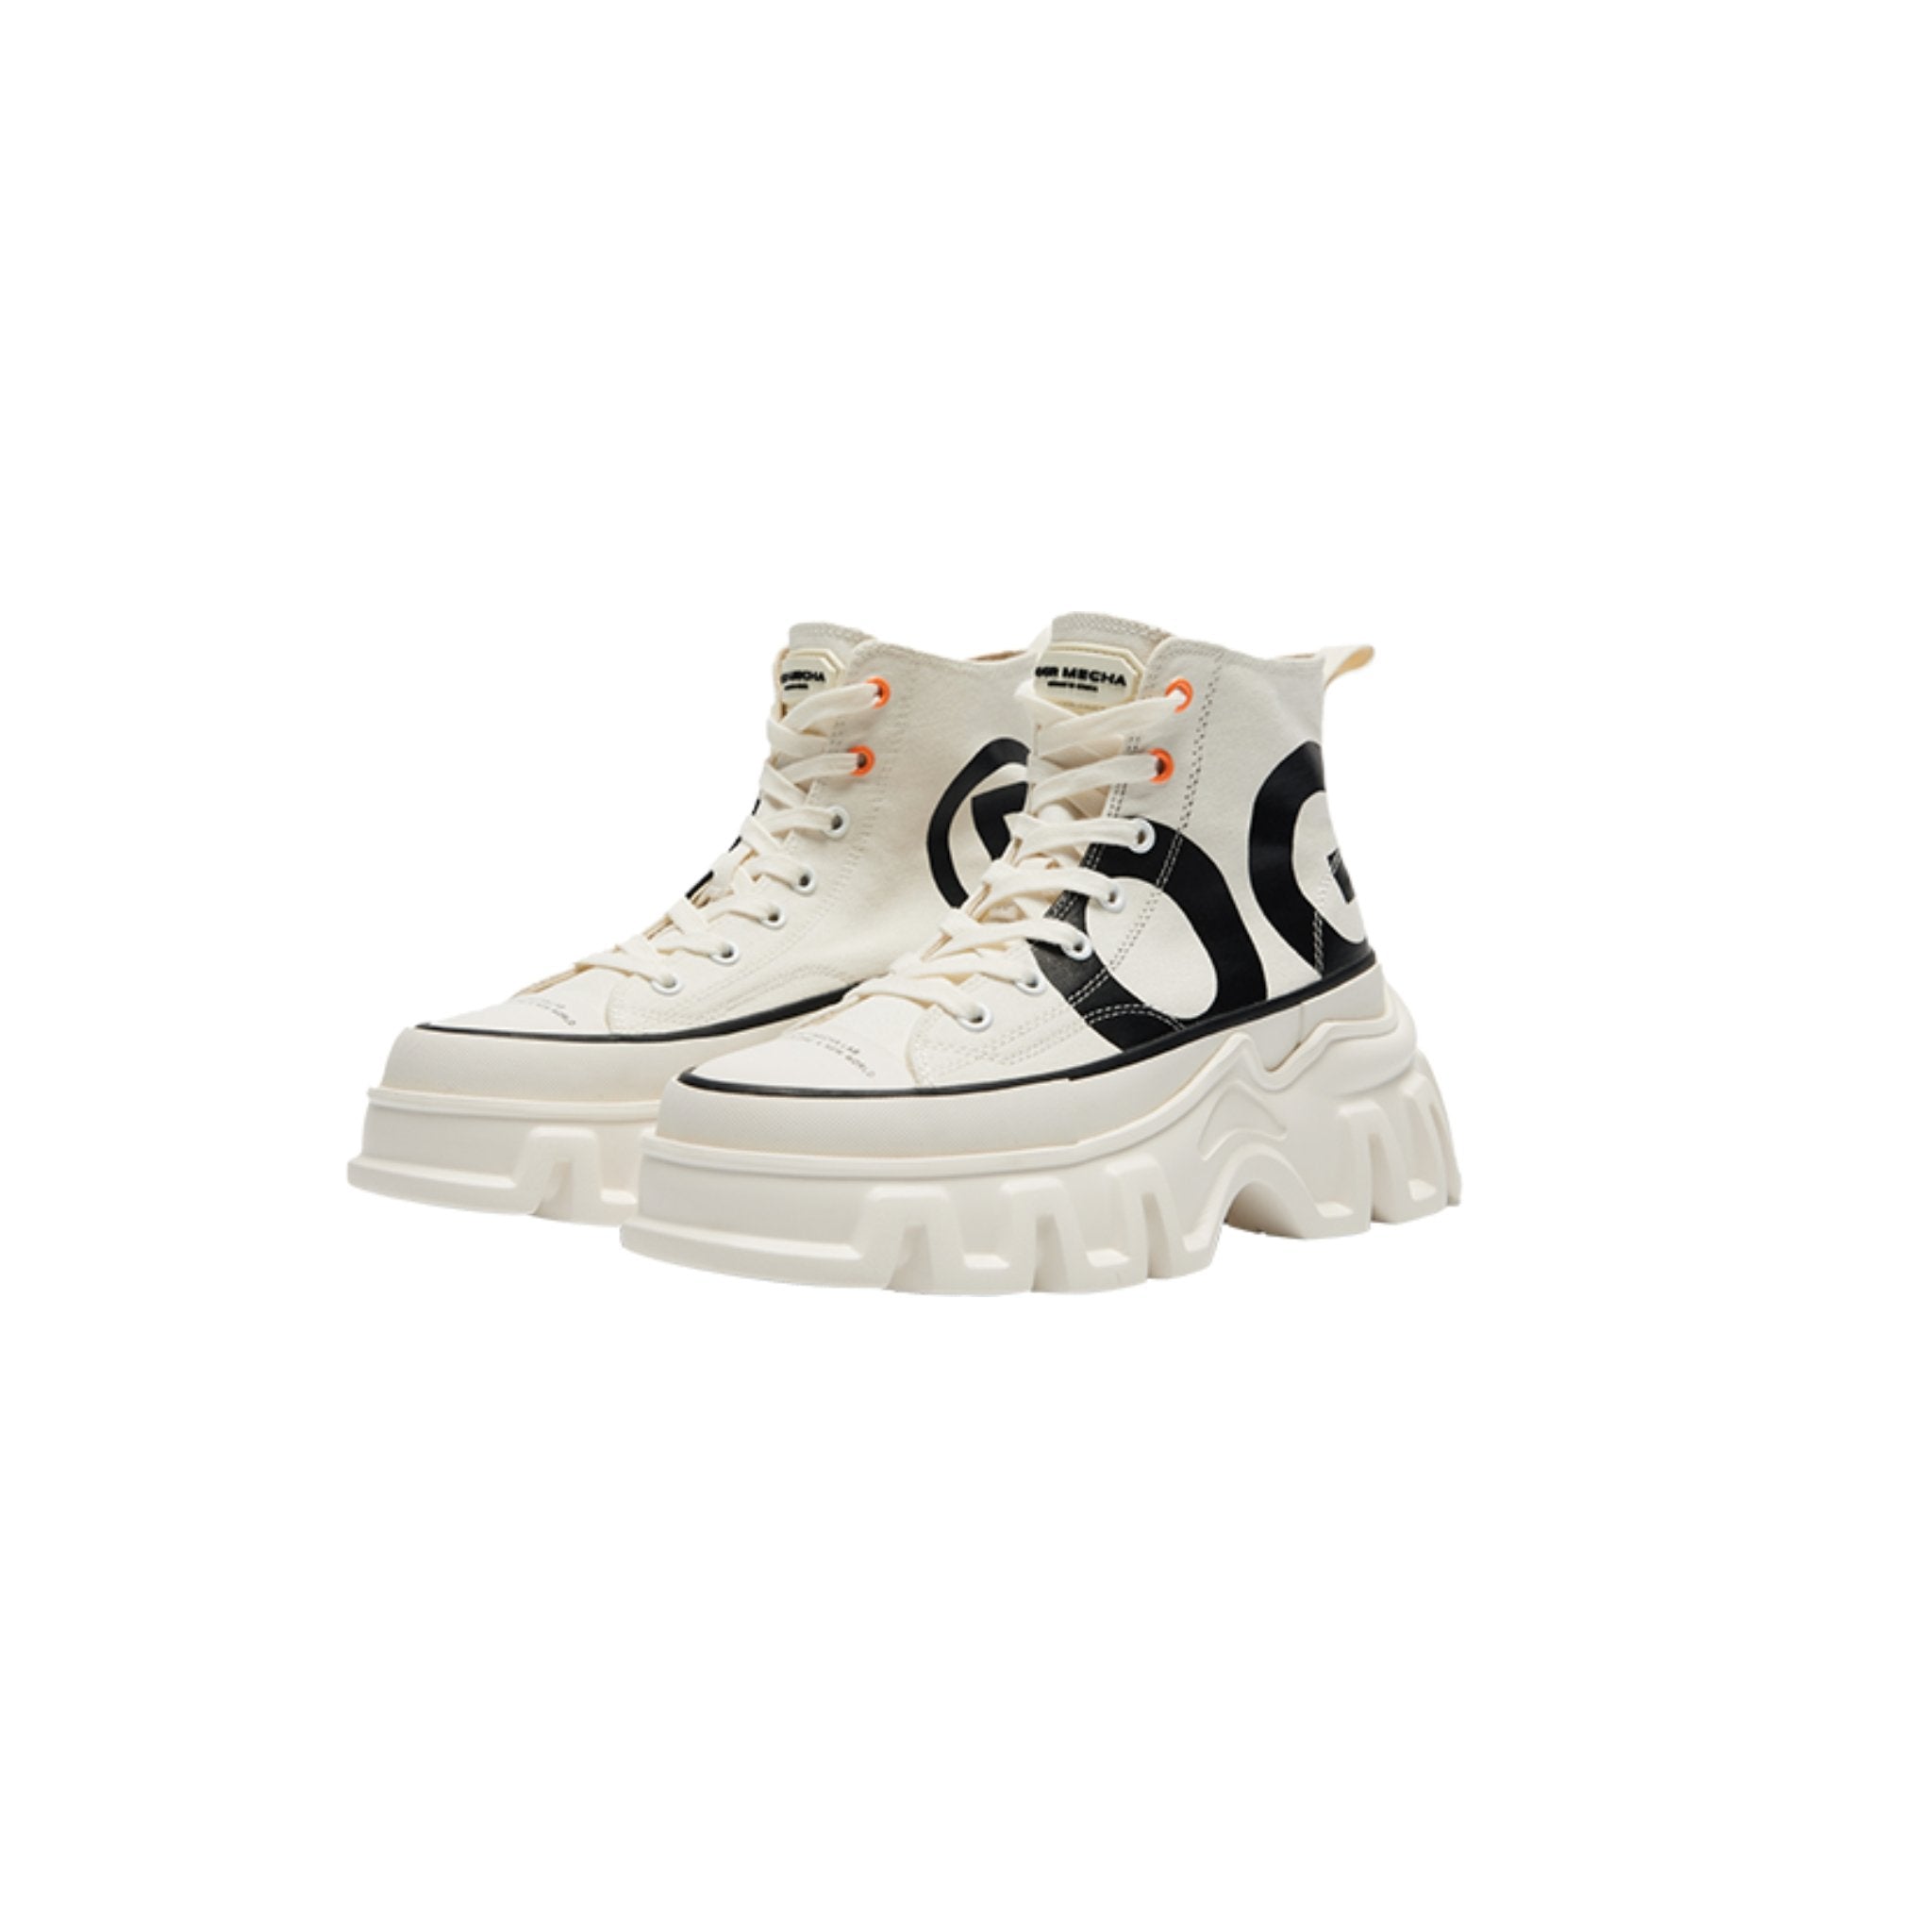 OGR SHEN FL Highs Prints Canvas Shoes White | MADA IN CHINA